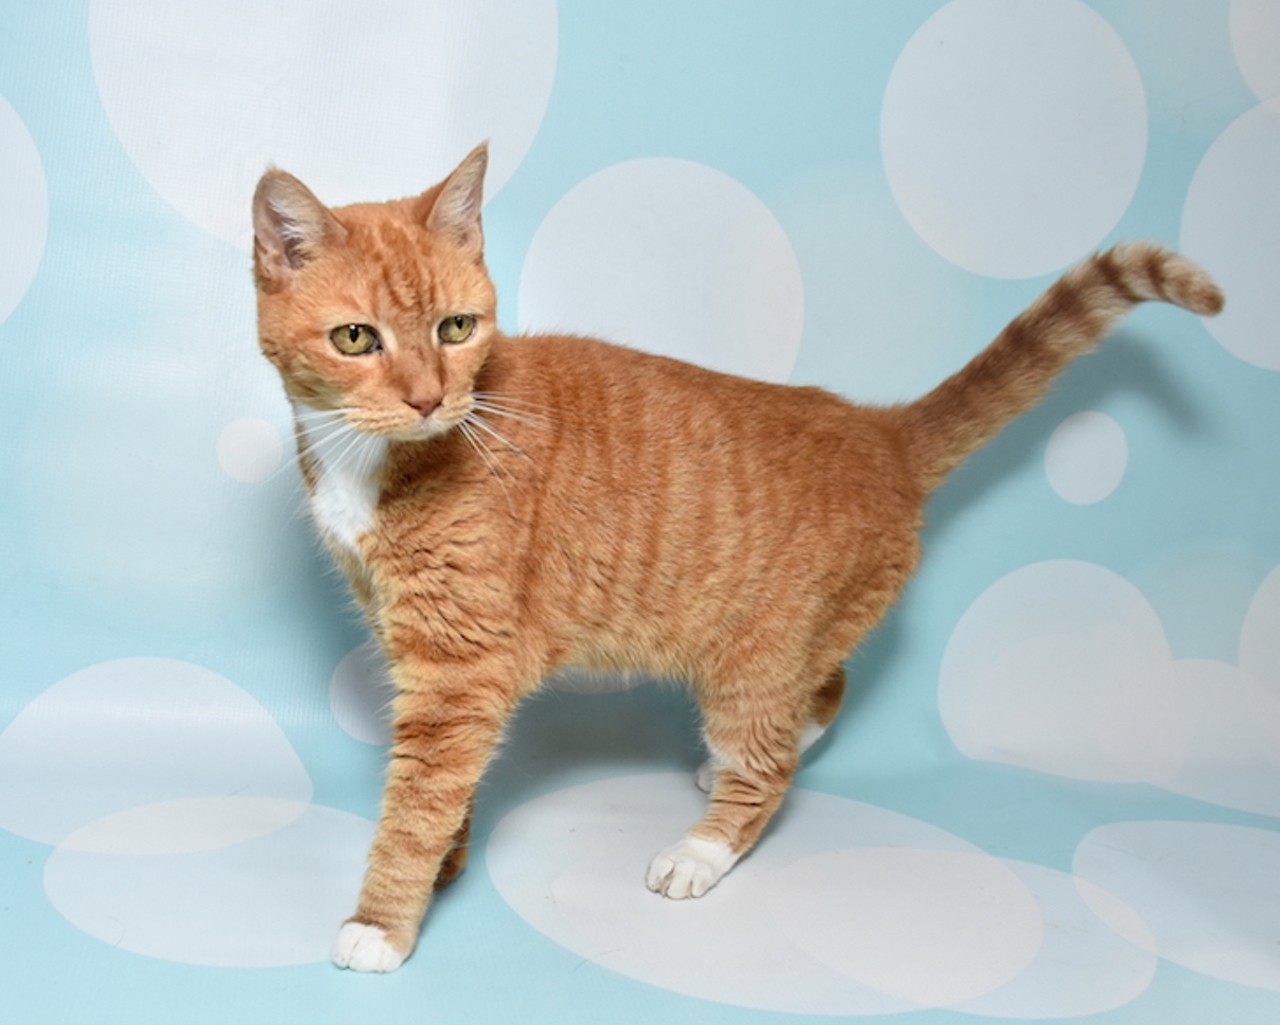 17 adoptable cats available right now at Orange County Animal Services